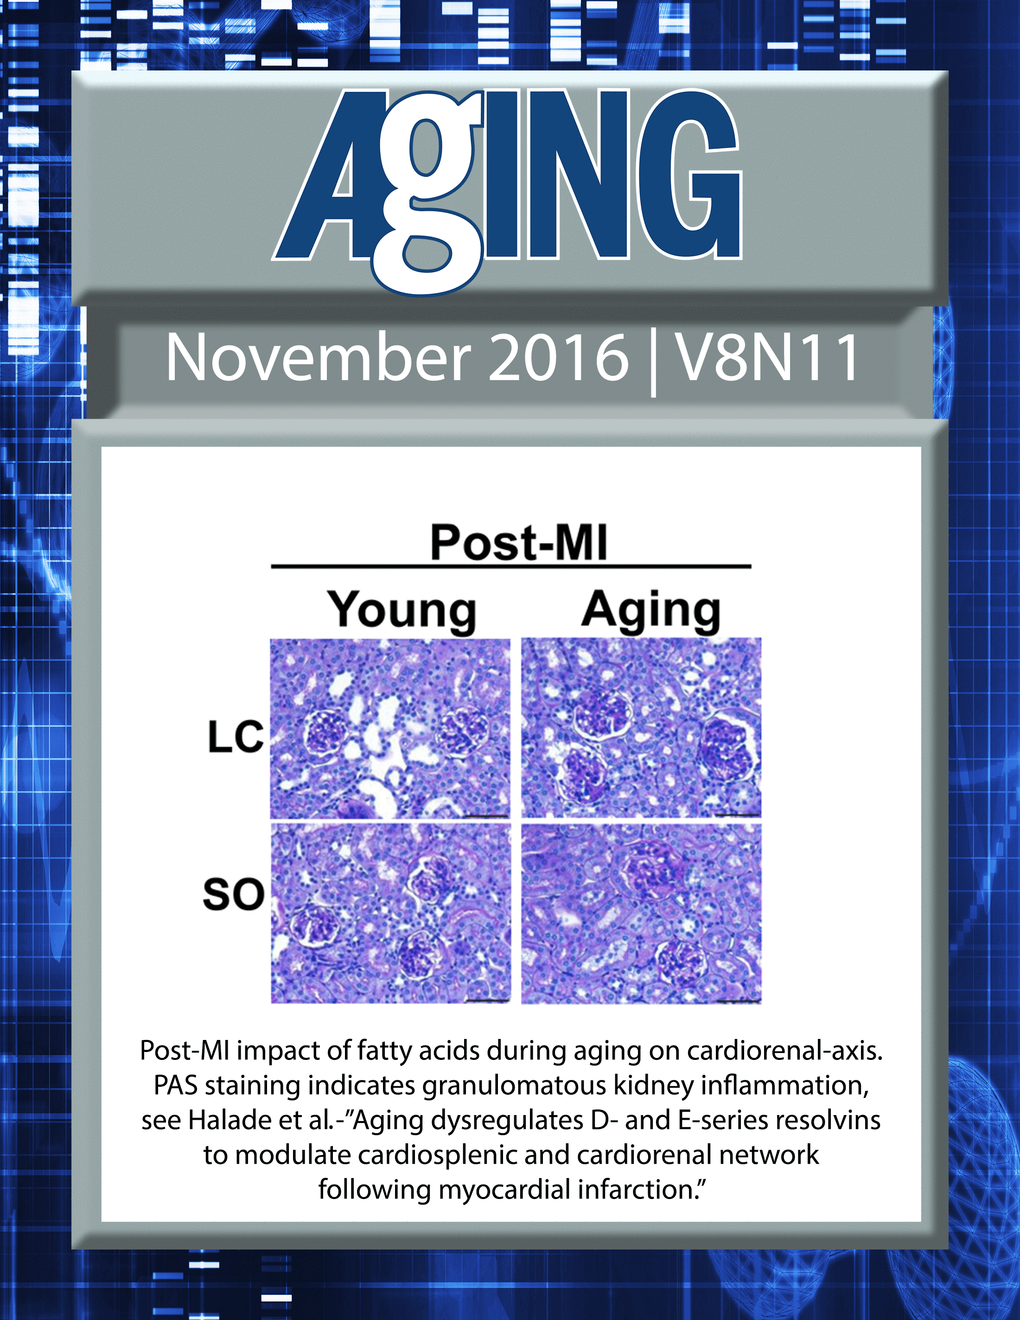 The cover for issue 11 of Aging features Figure 6B, ''Aging dysregulates D- and E-series resolvins to modulate cardiosplenic and cardiorenal network following myocardial infarction" from Halade et al.